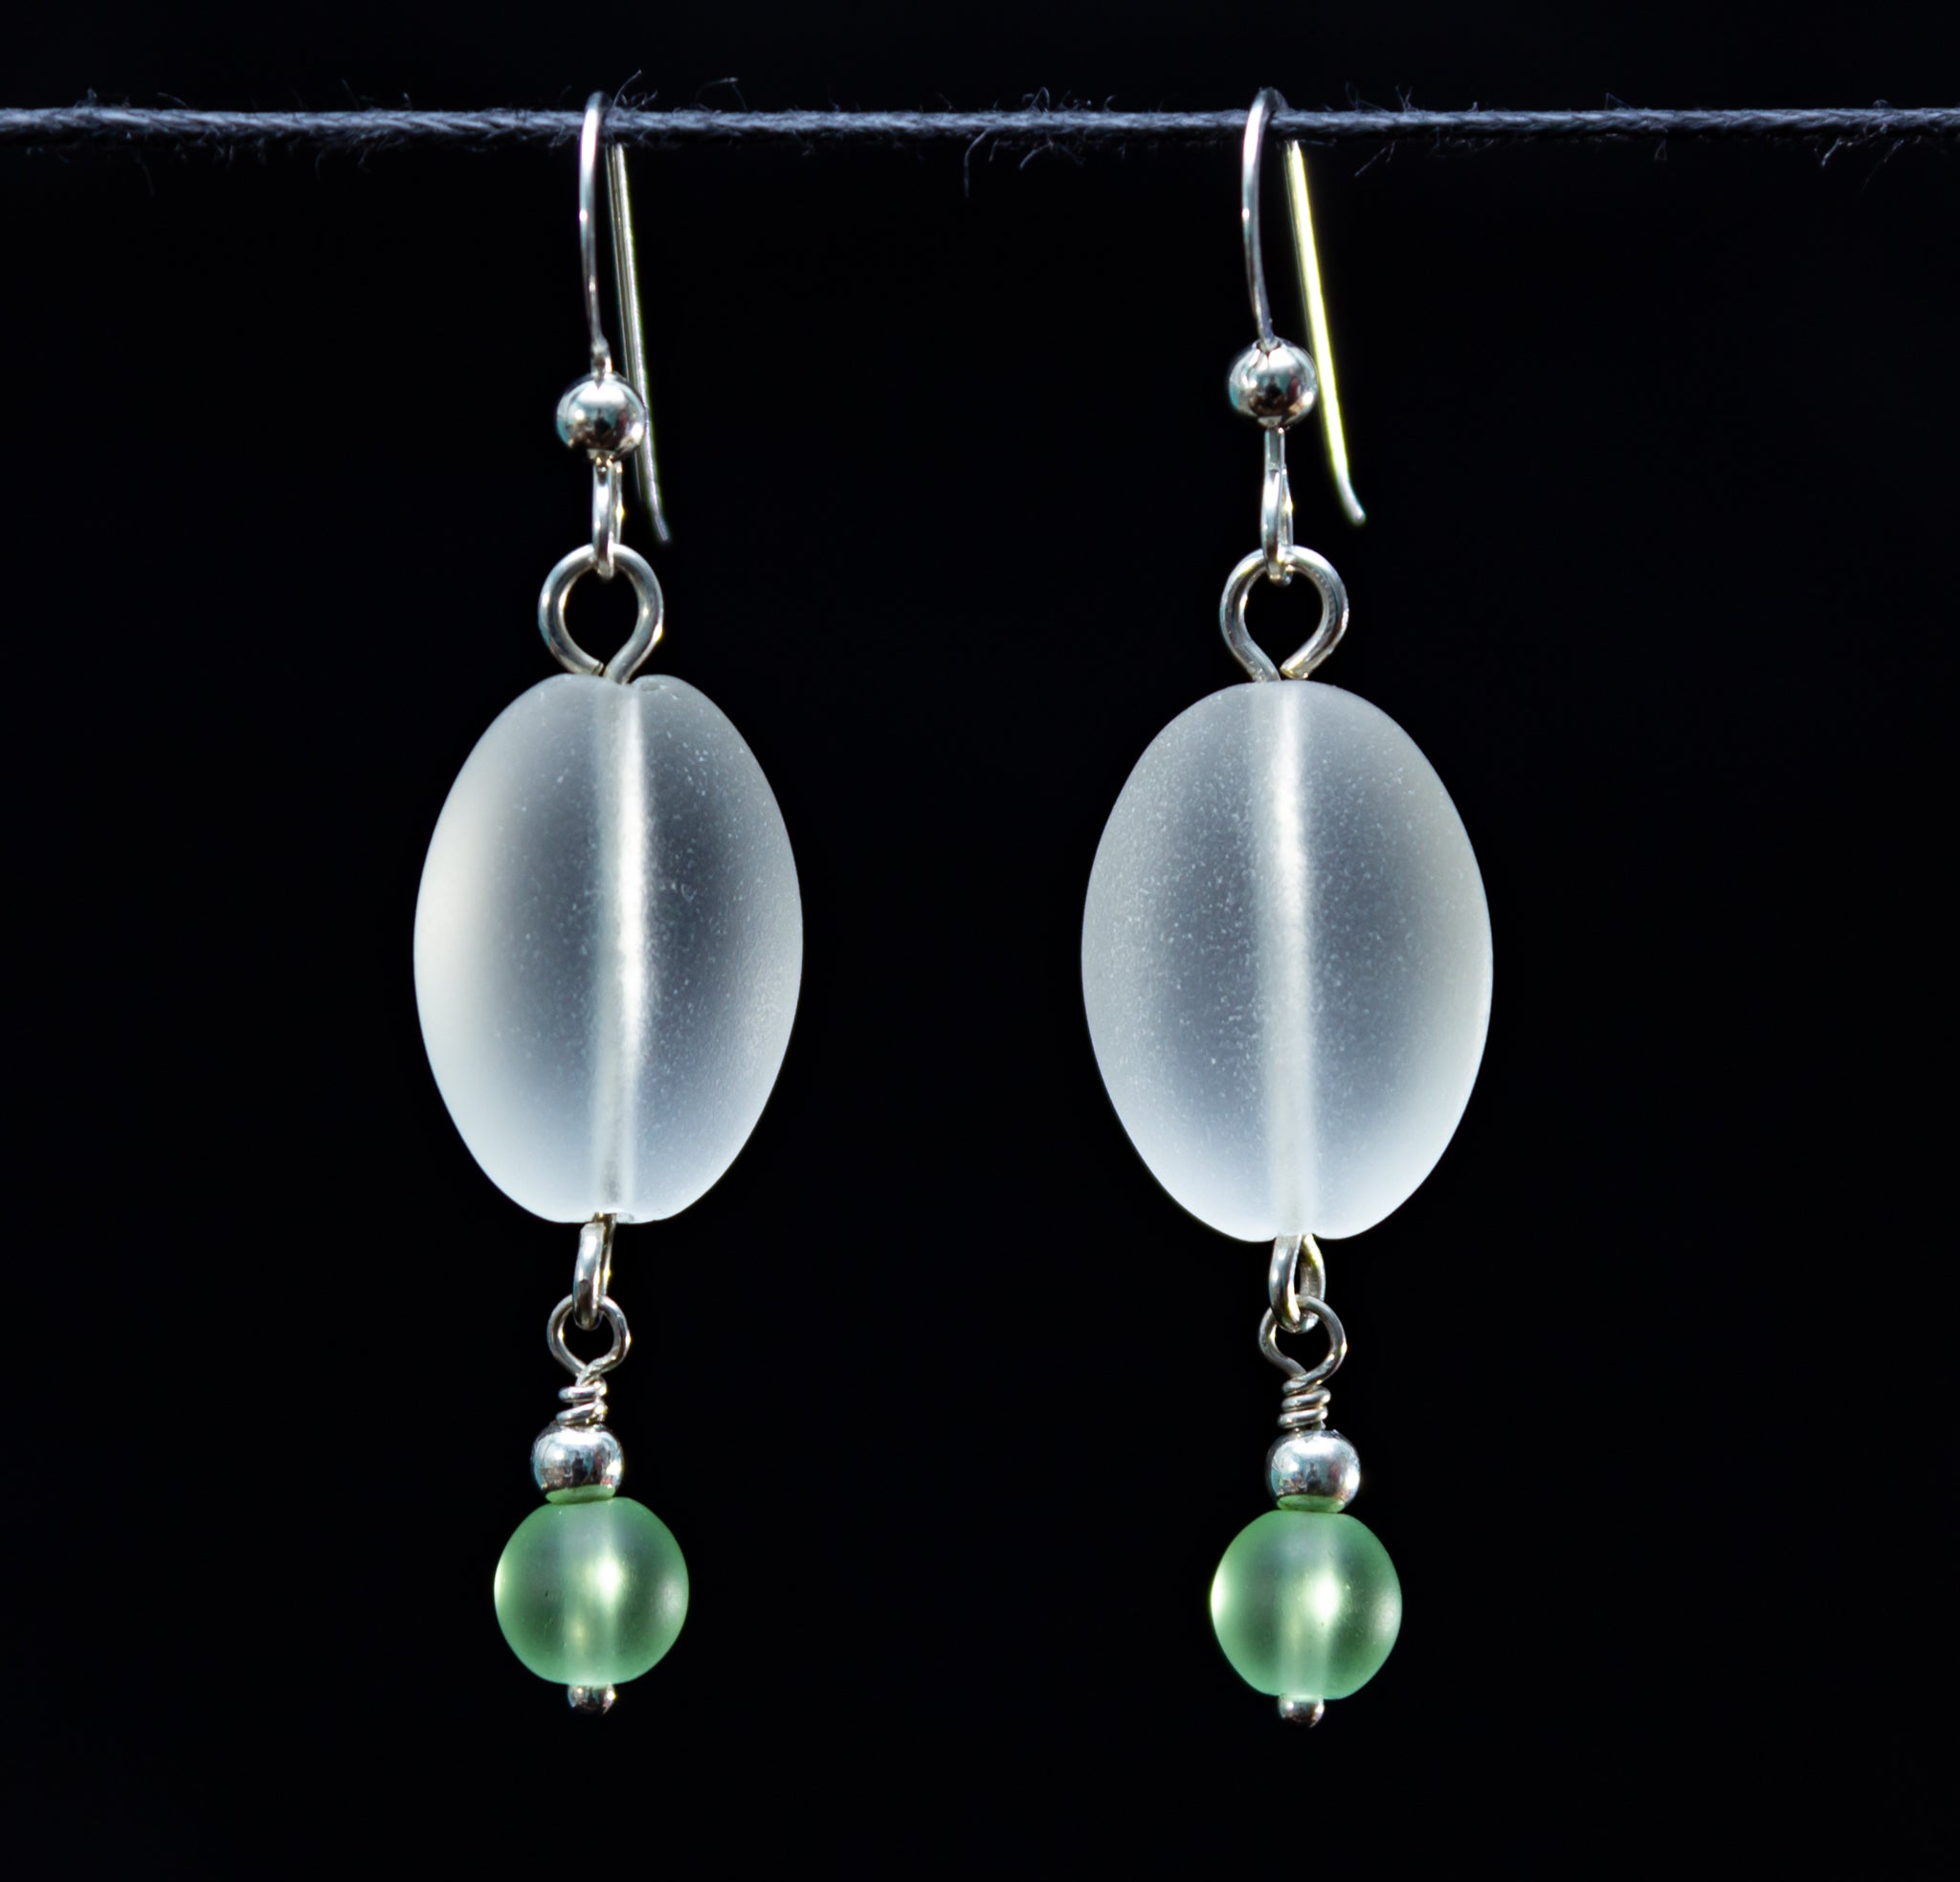 Frosted white & green earrings